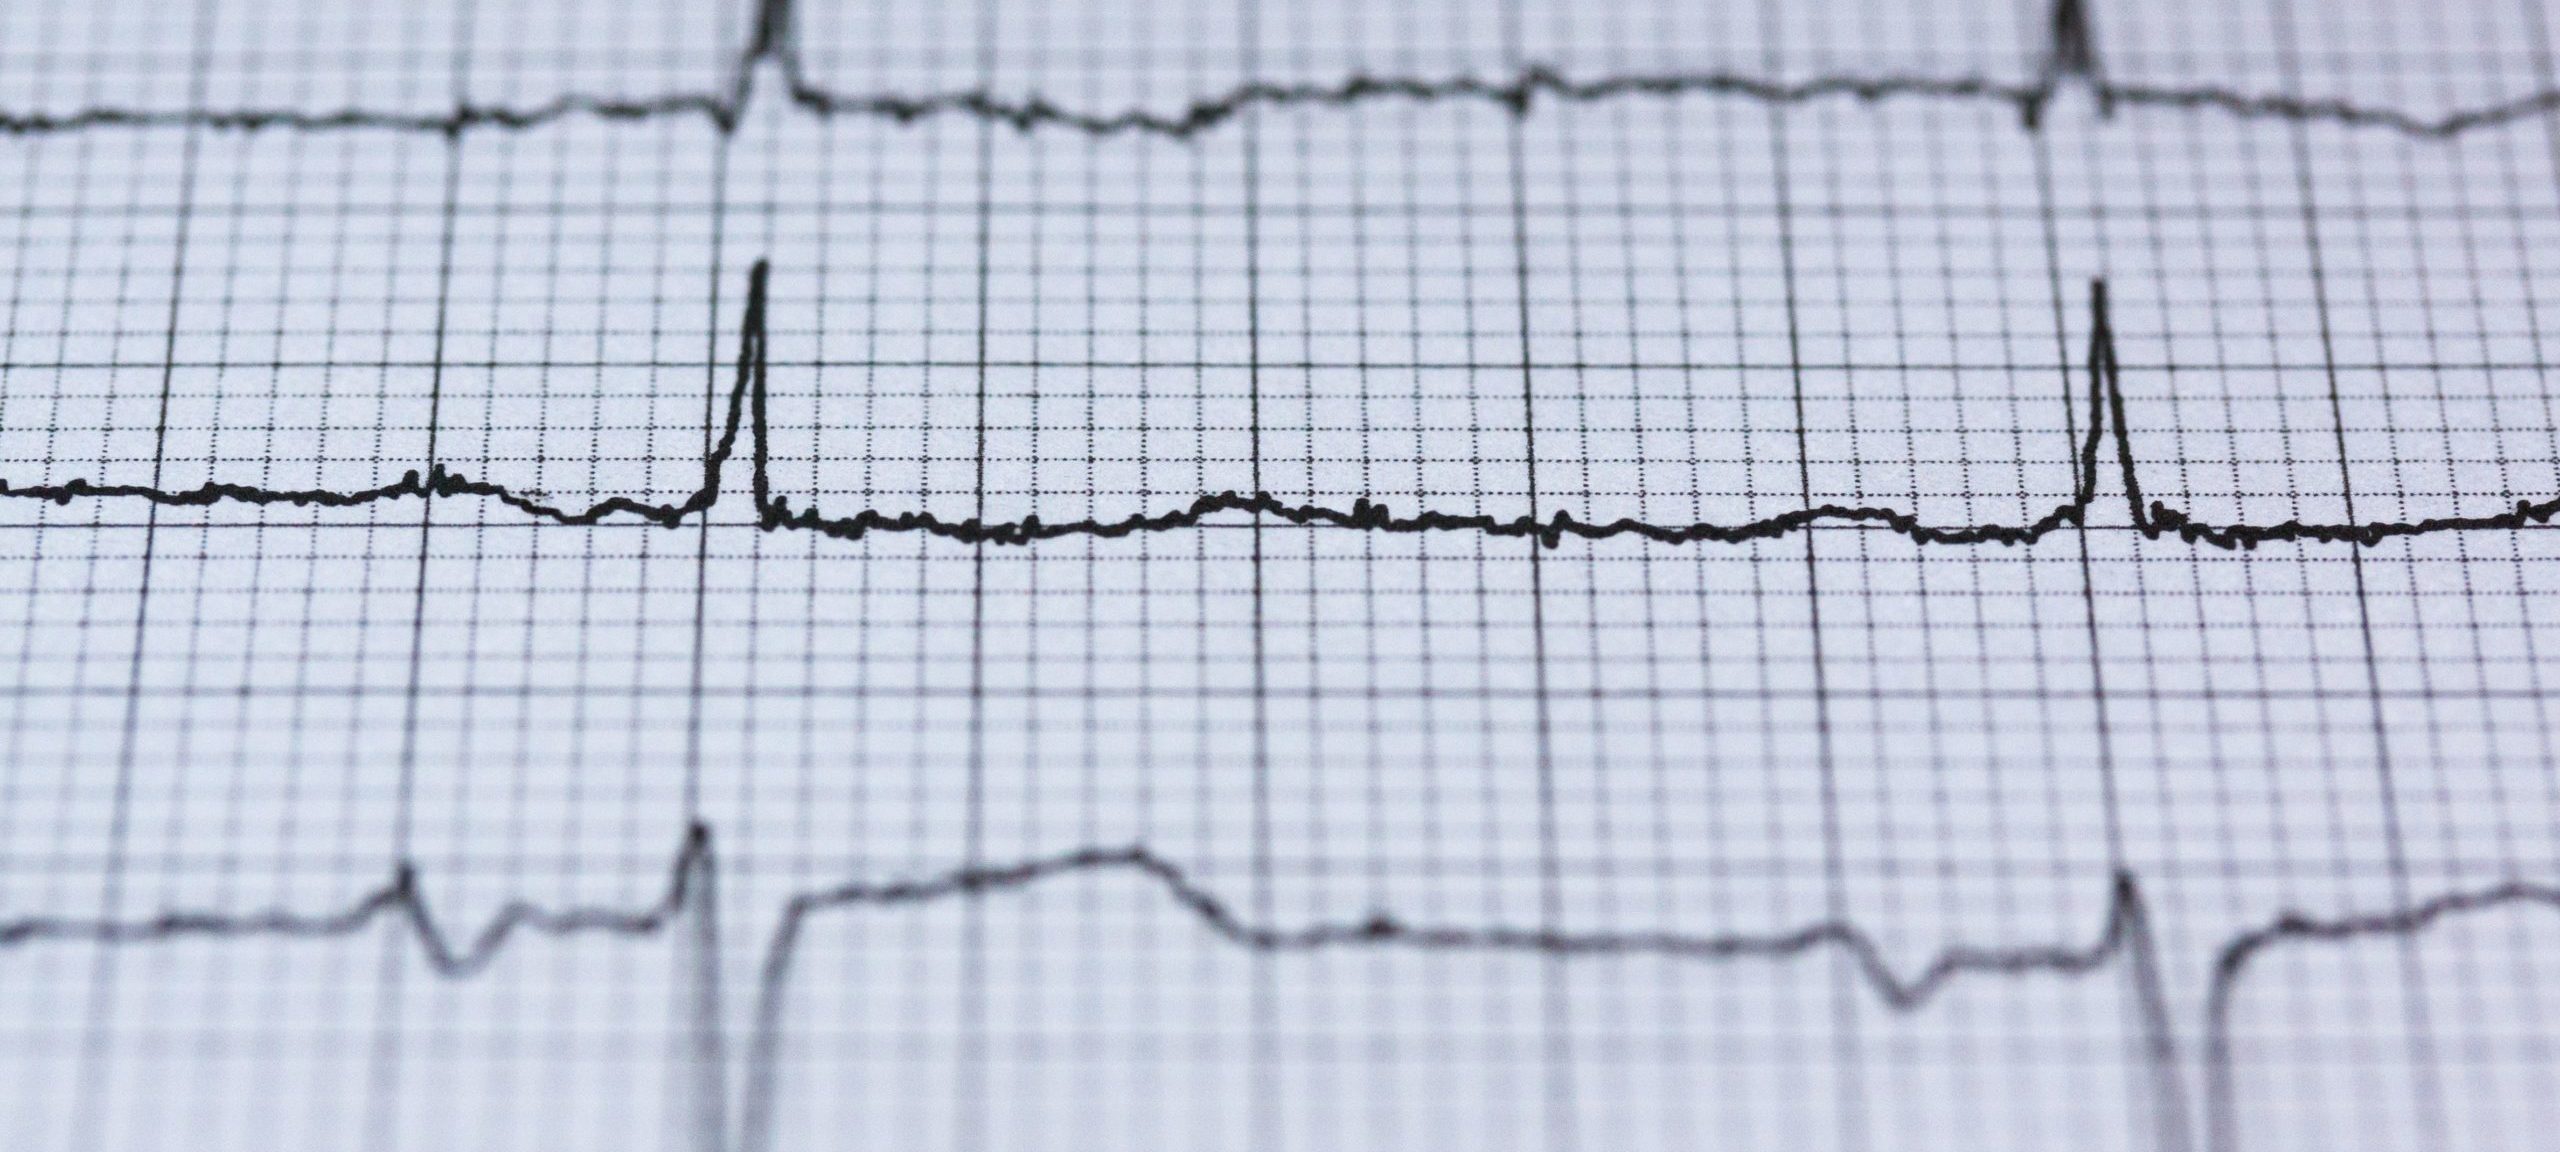 Close up view of an electrocardiograph